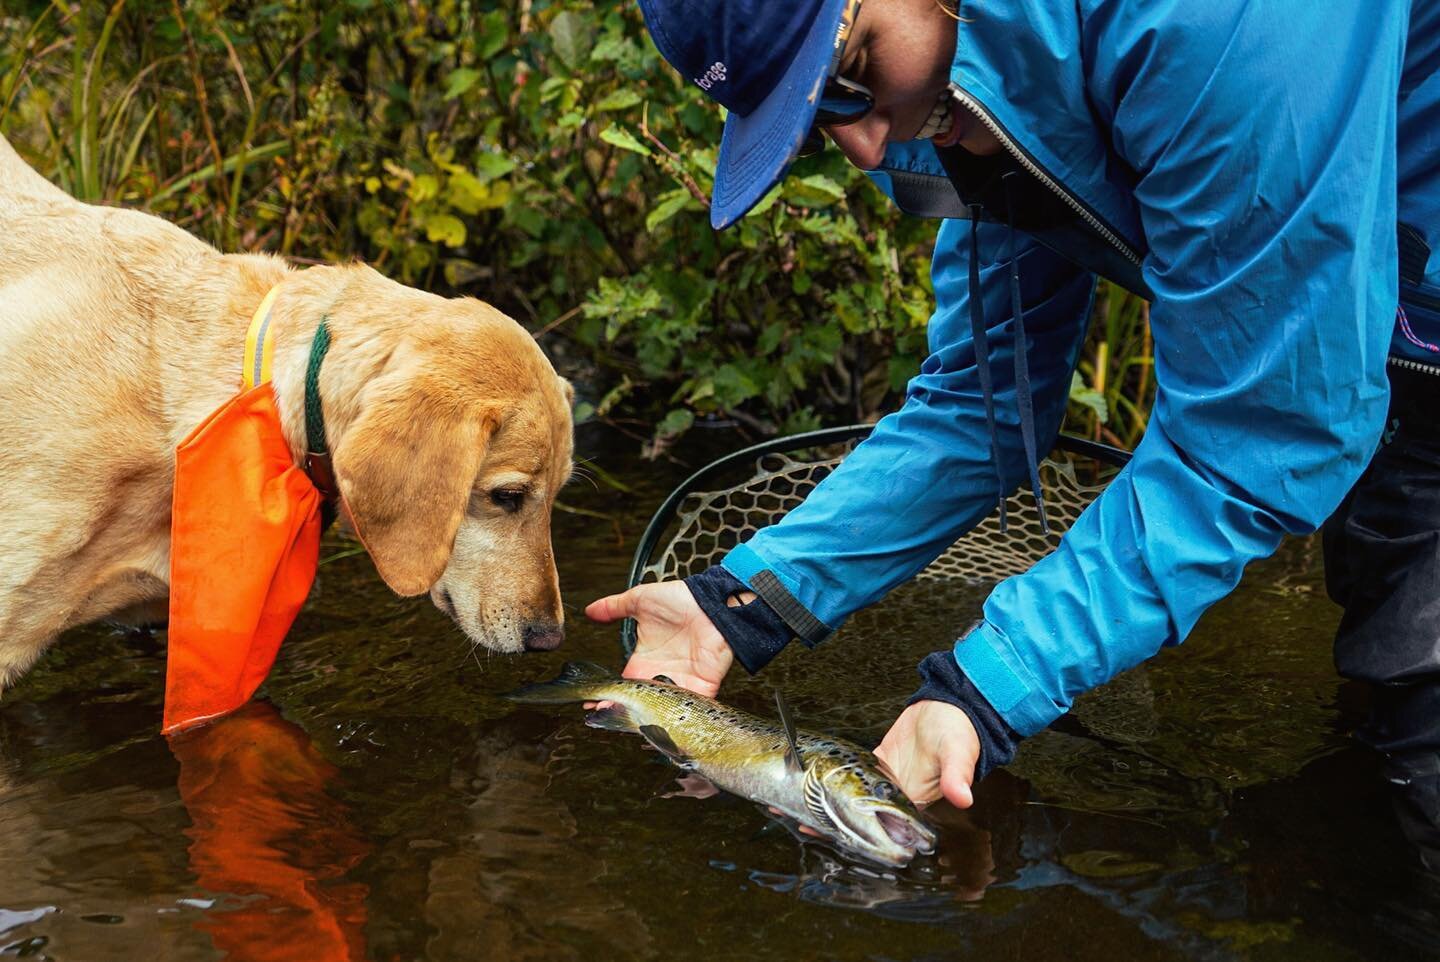 fly fishing is kind of like trick or treat for the fish, in this case a trick that paid off in a treat for us to meet this river monster. Nelson was only slightly spooked.
.
.
.
happy spooky season 🥸